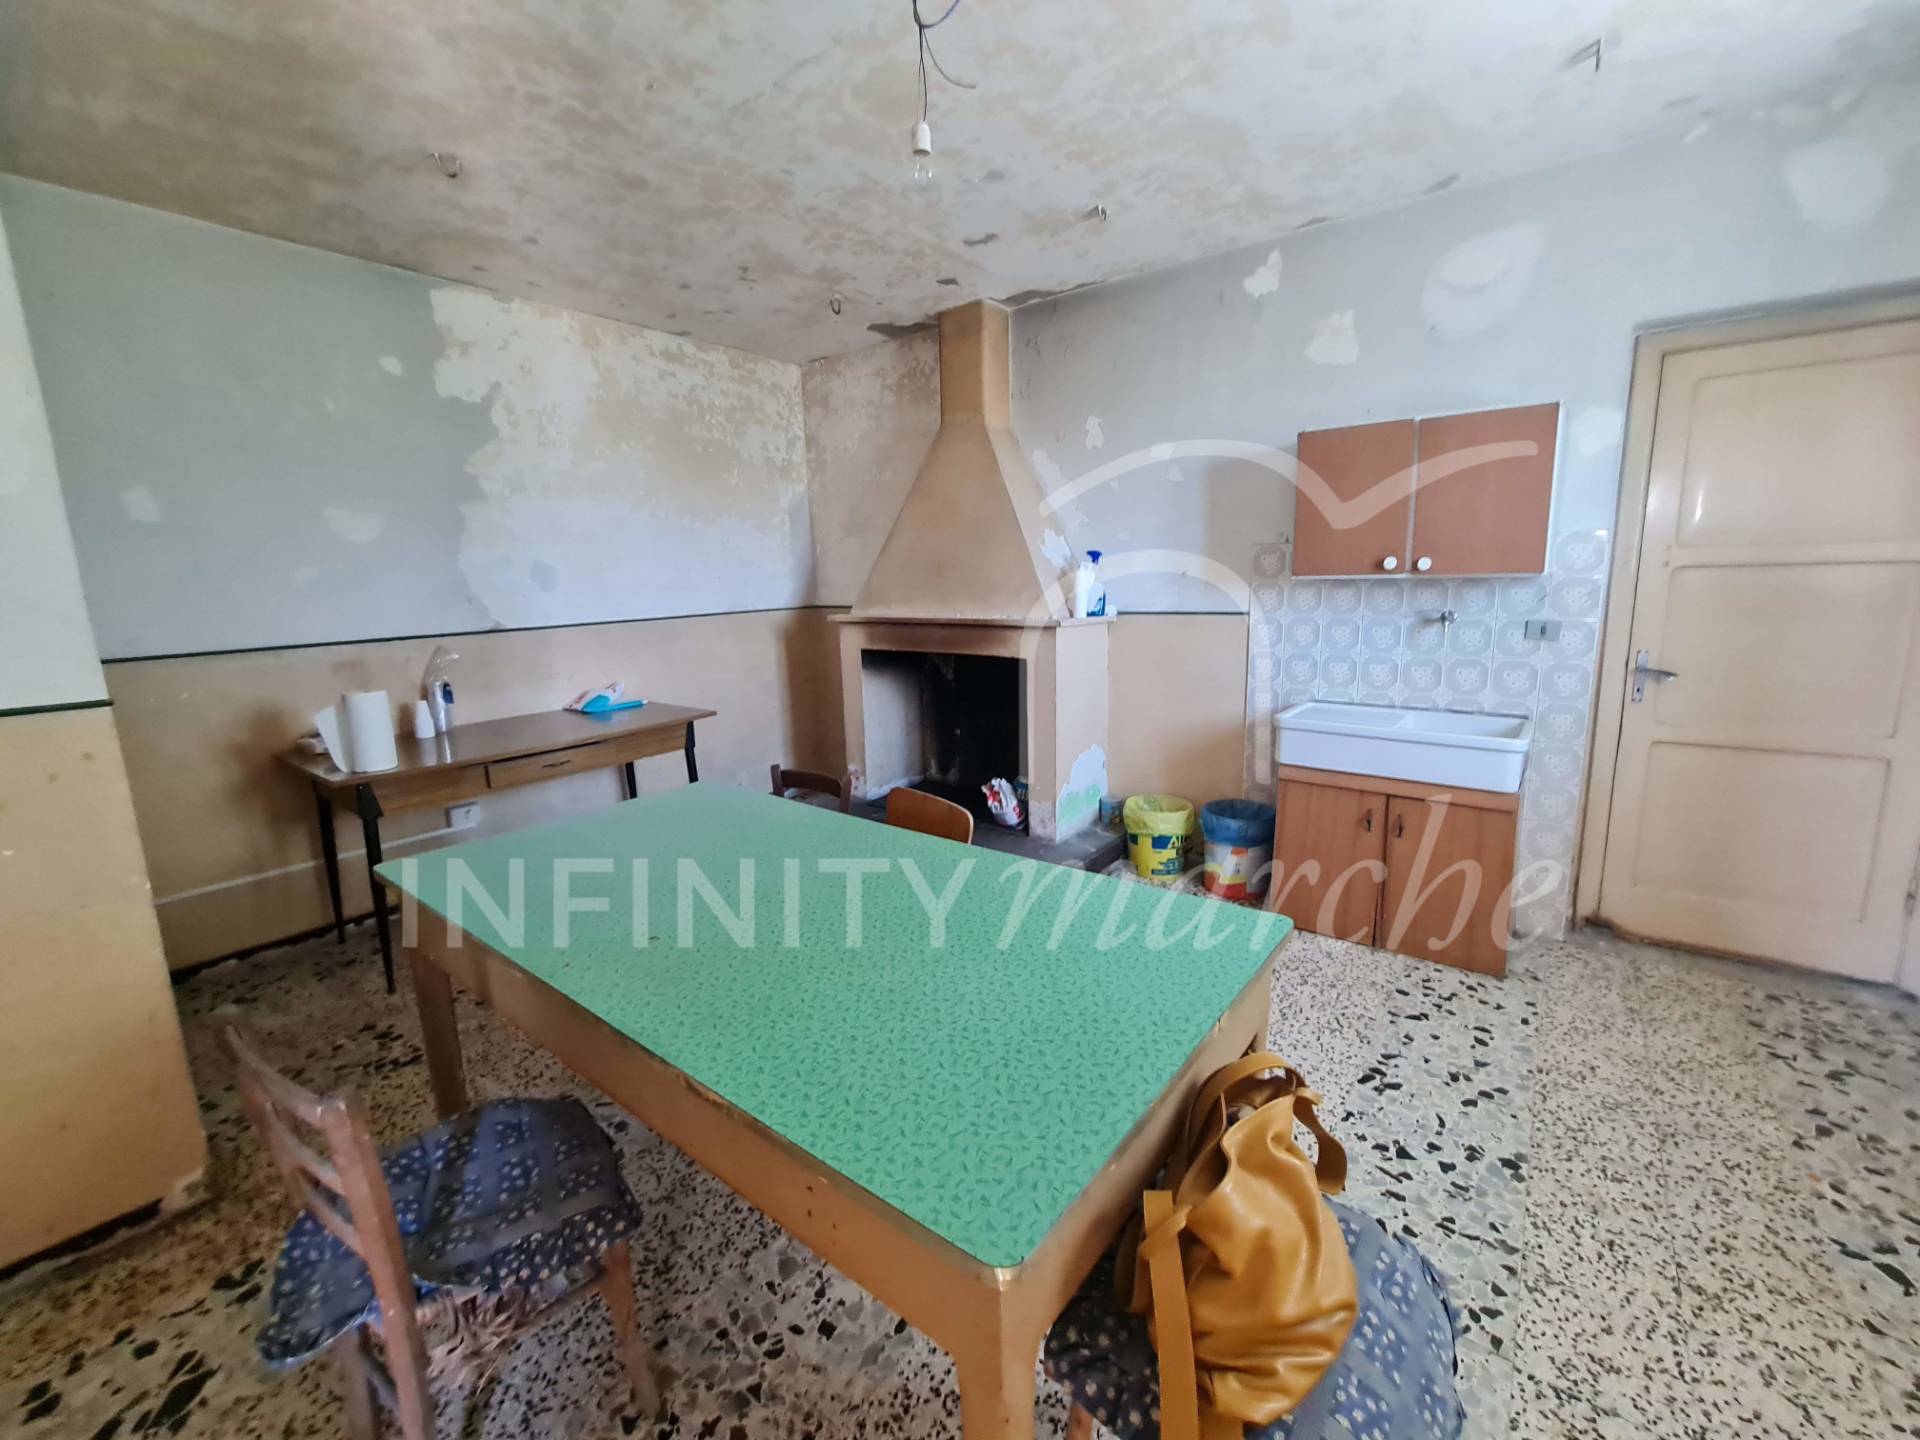 Country House in Francavilla d'Ete (Fermo)